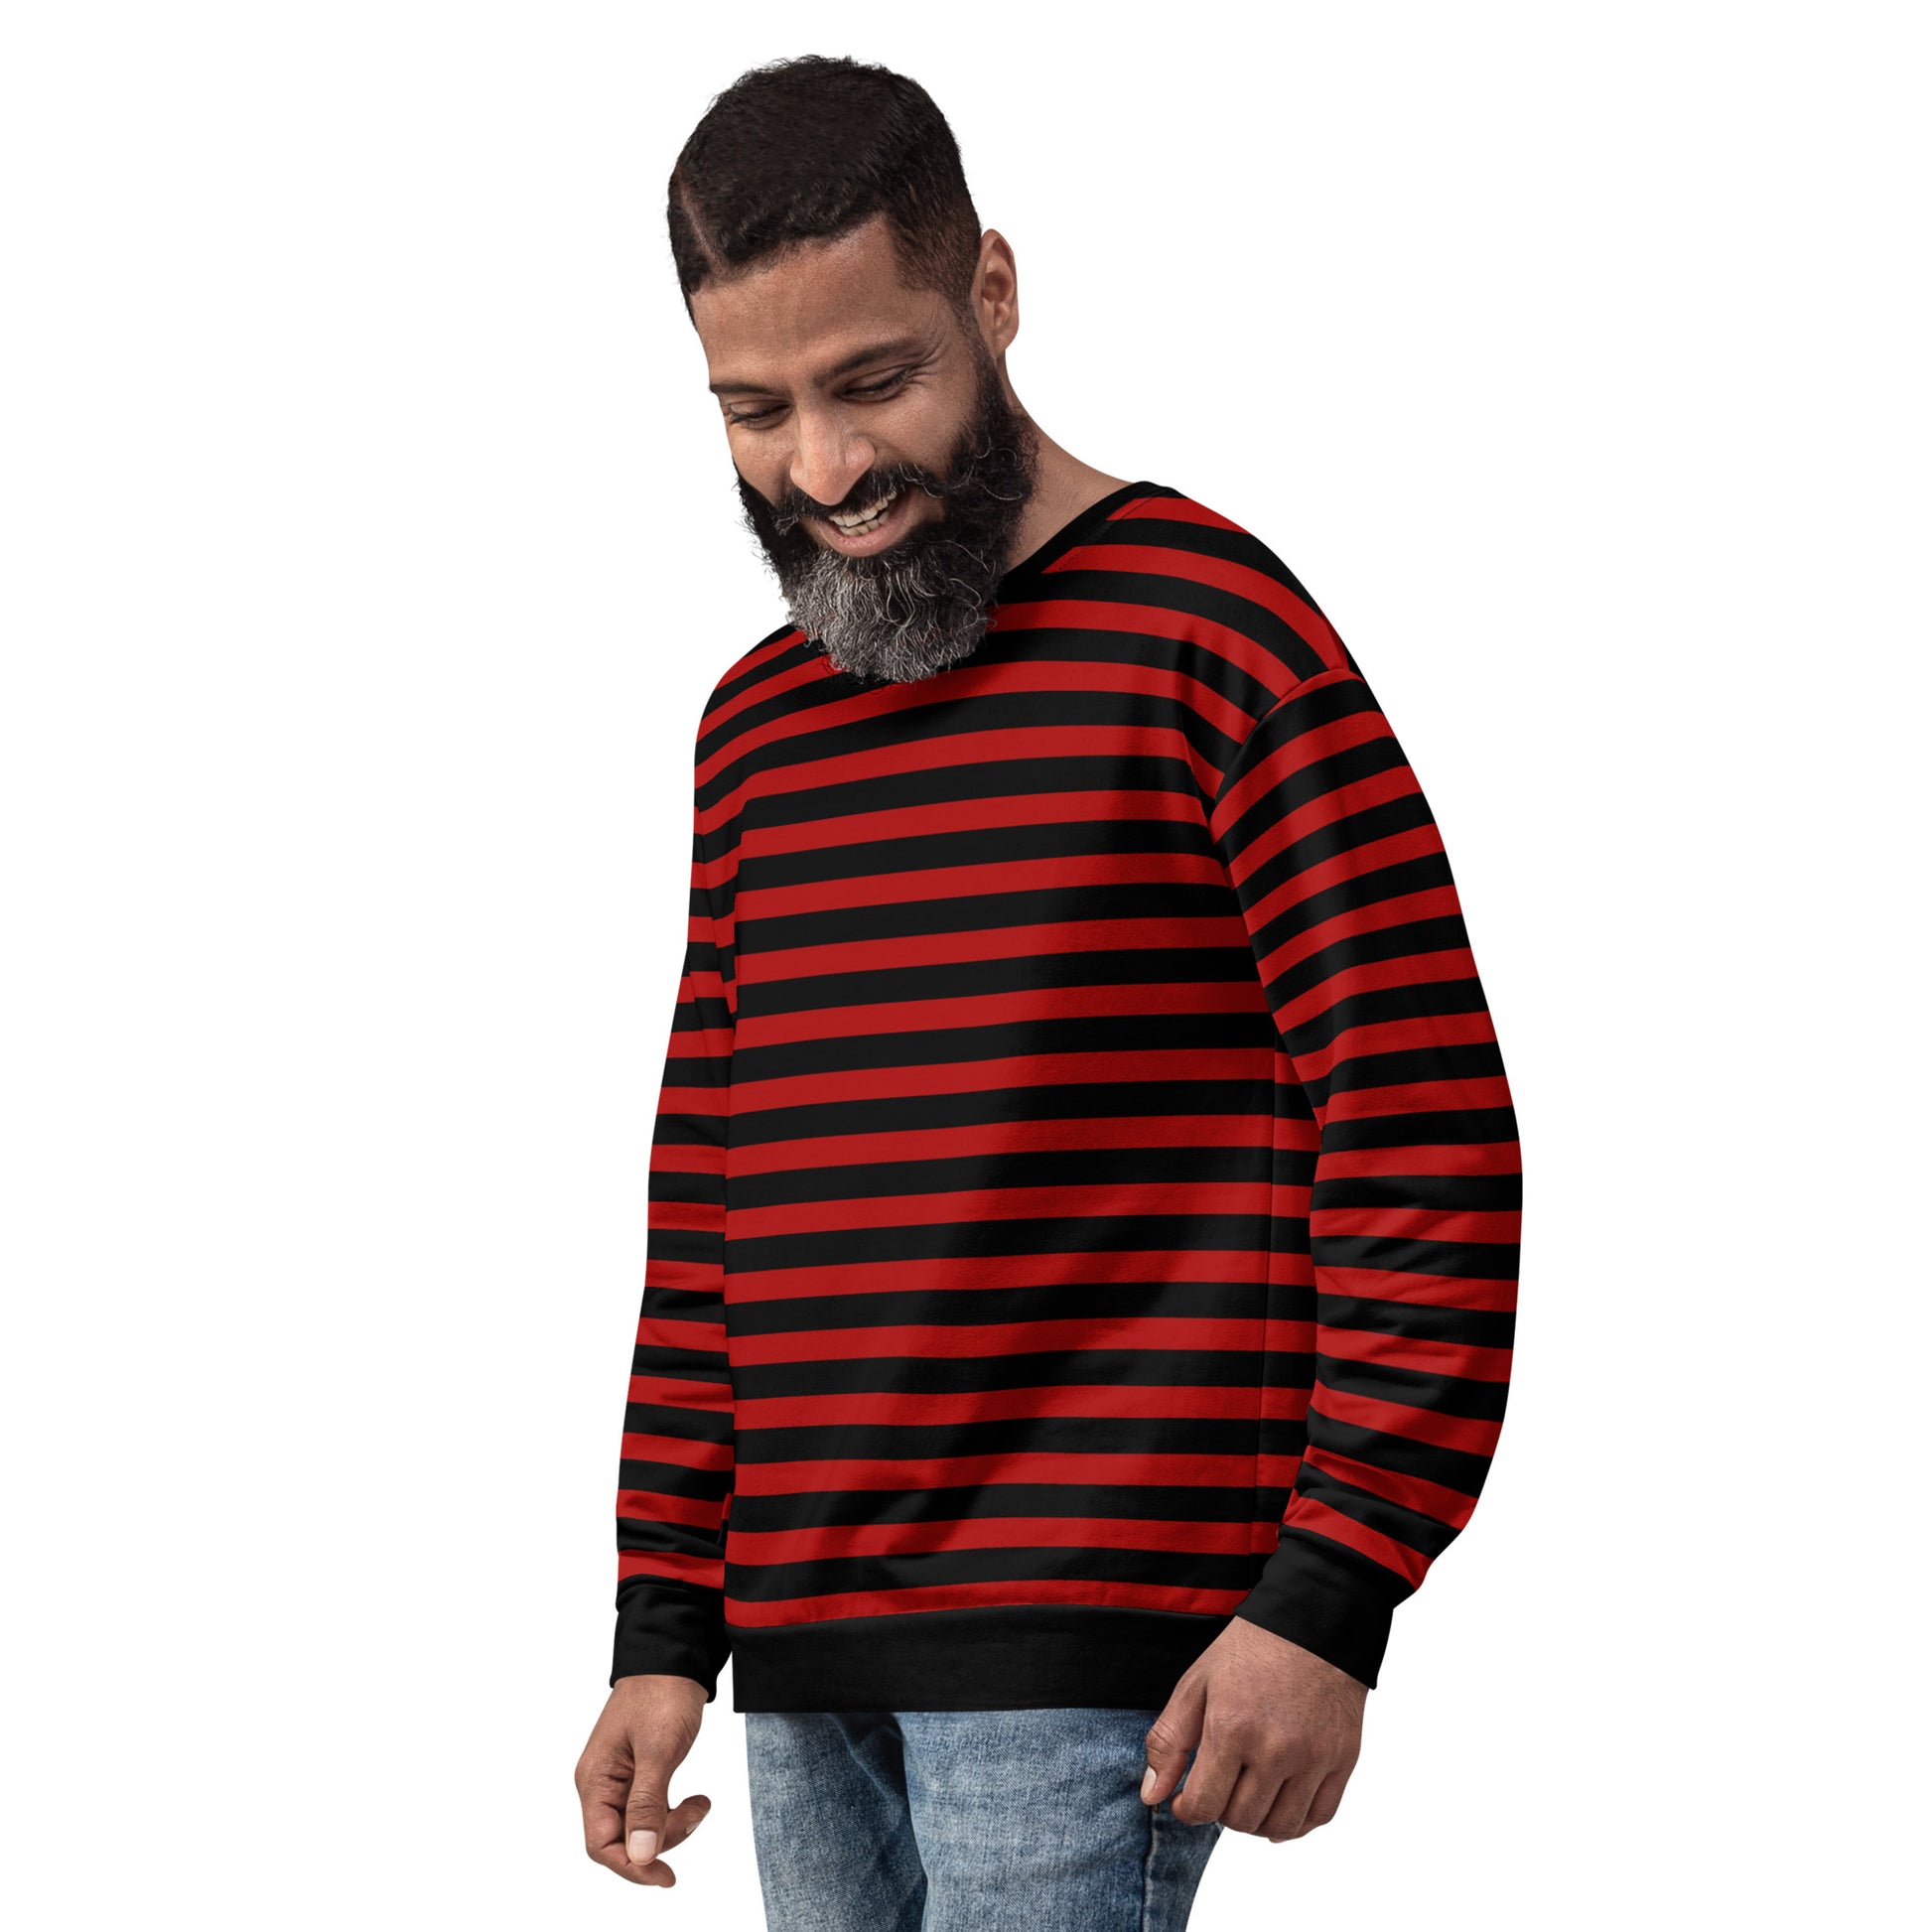 Striped Sweater For Men And Women